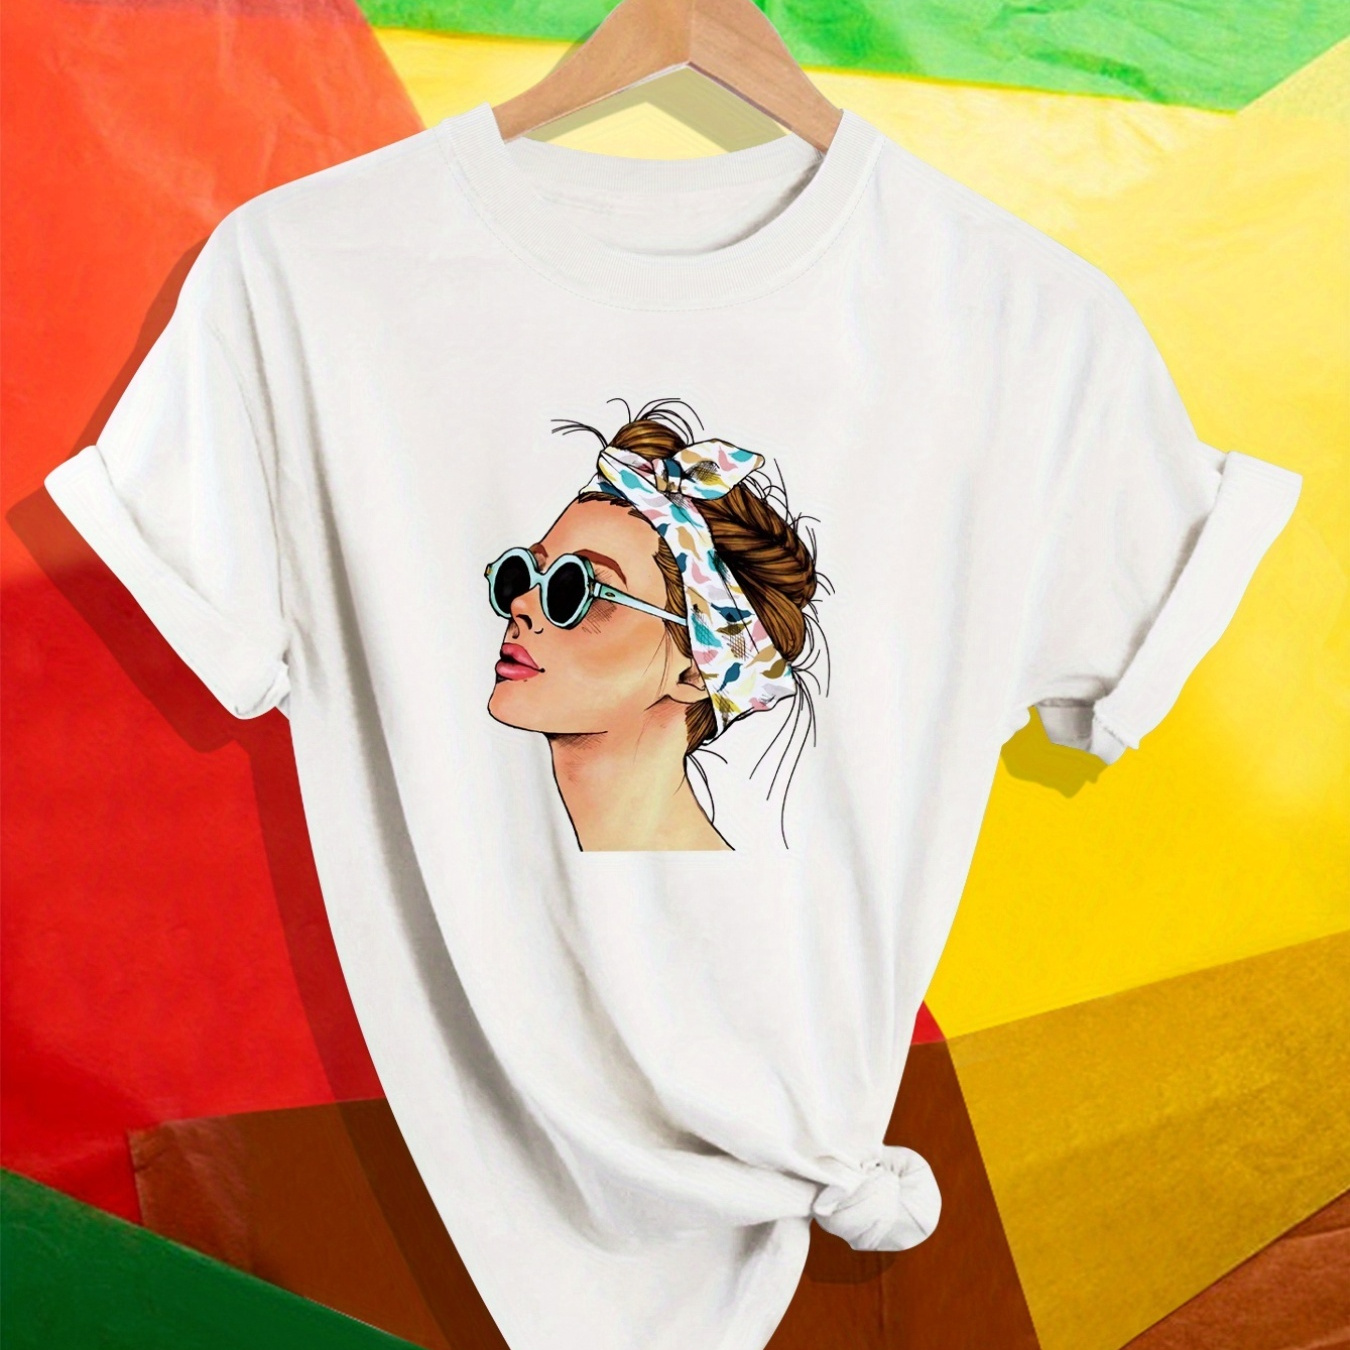 

Woman Print T-shirt, Short Sleeve Crew Neck Casual Top For Summer & Spring, Women's Clothing